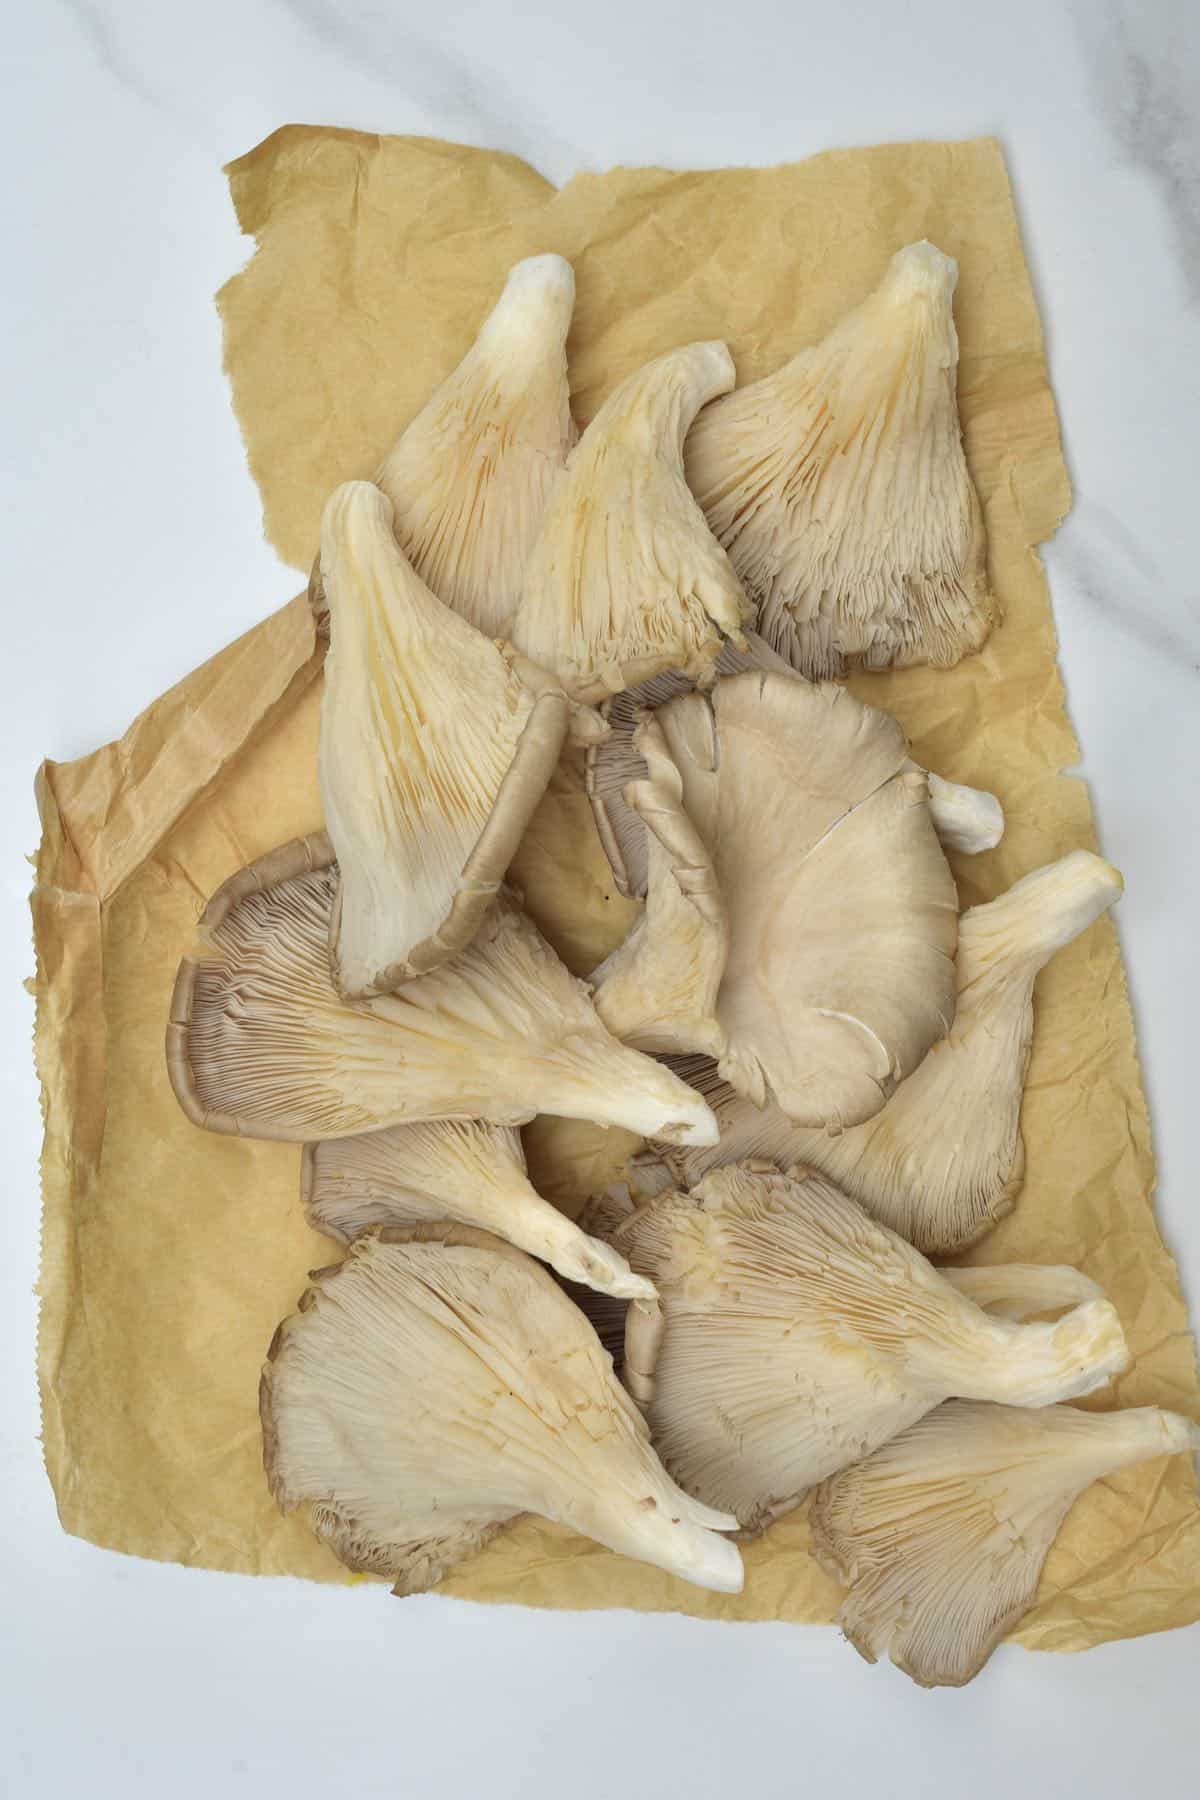 Oyster mushrooms on a flat surface